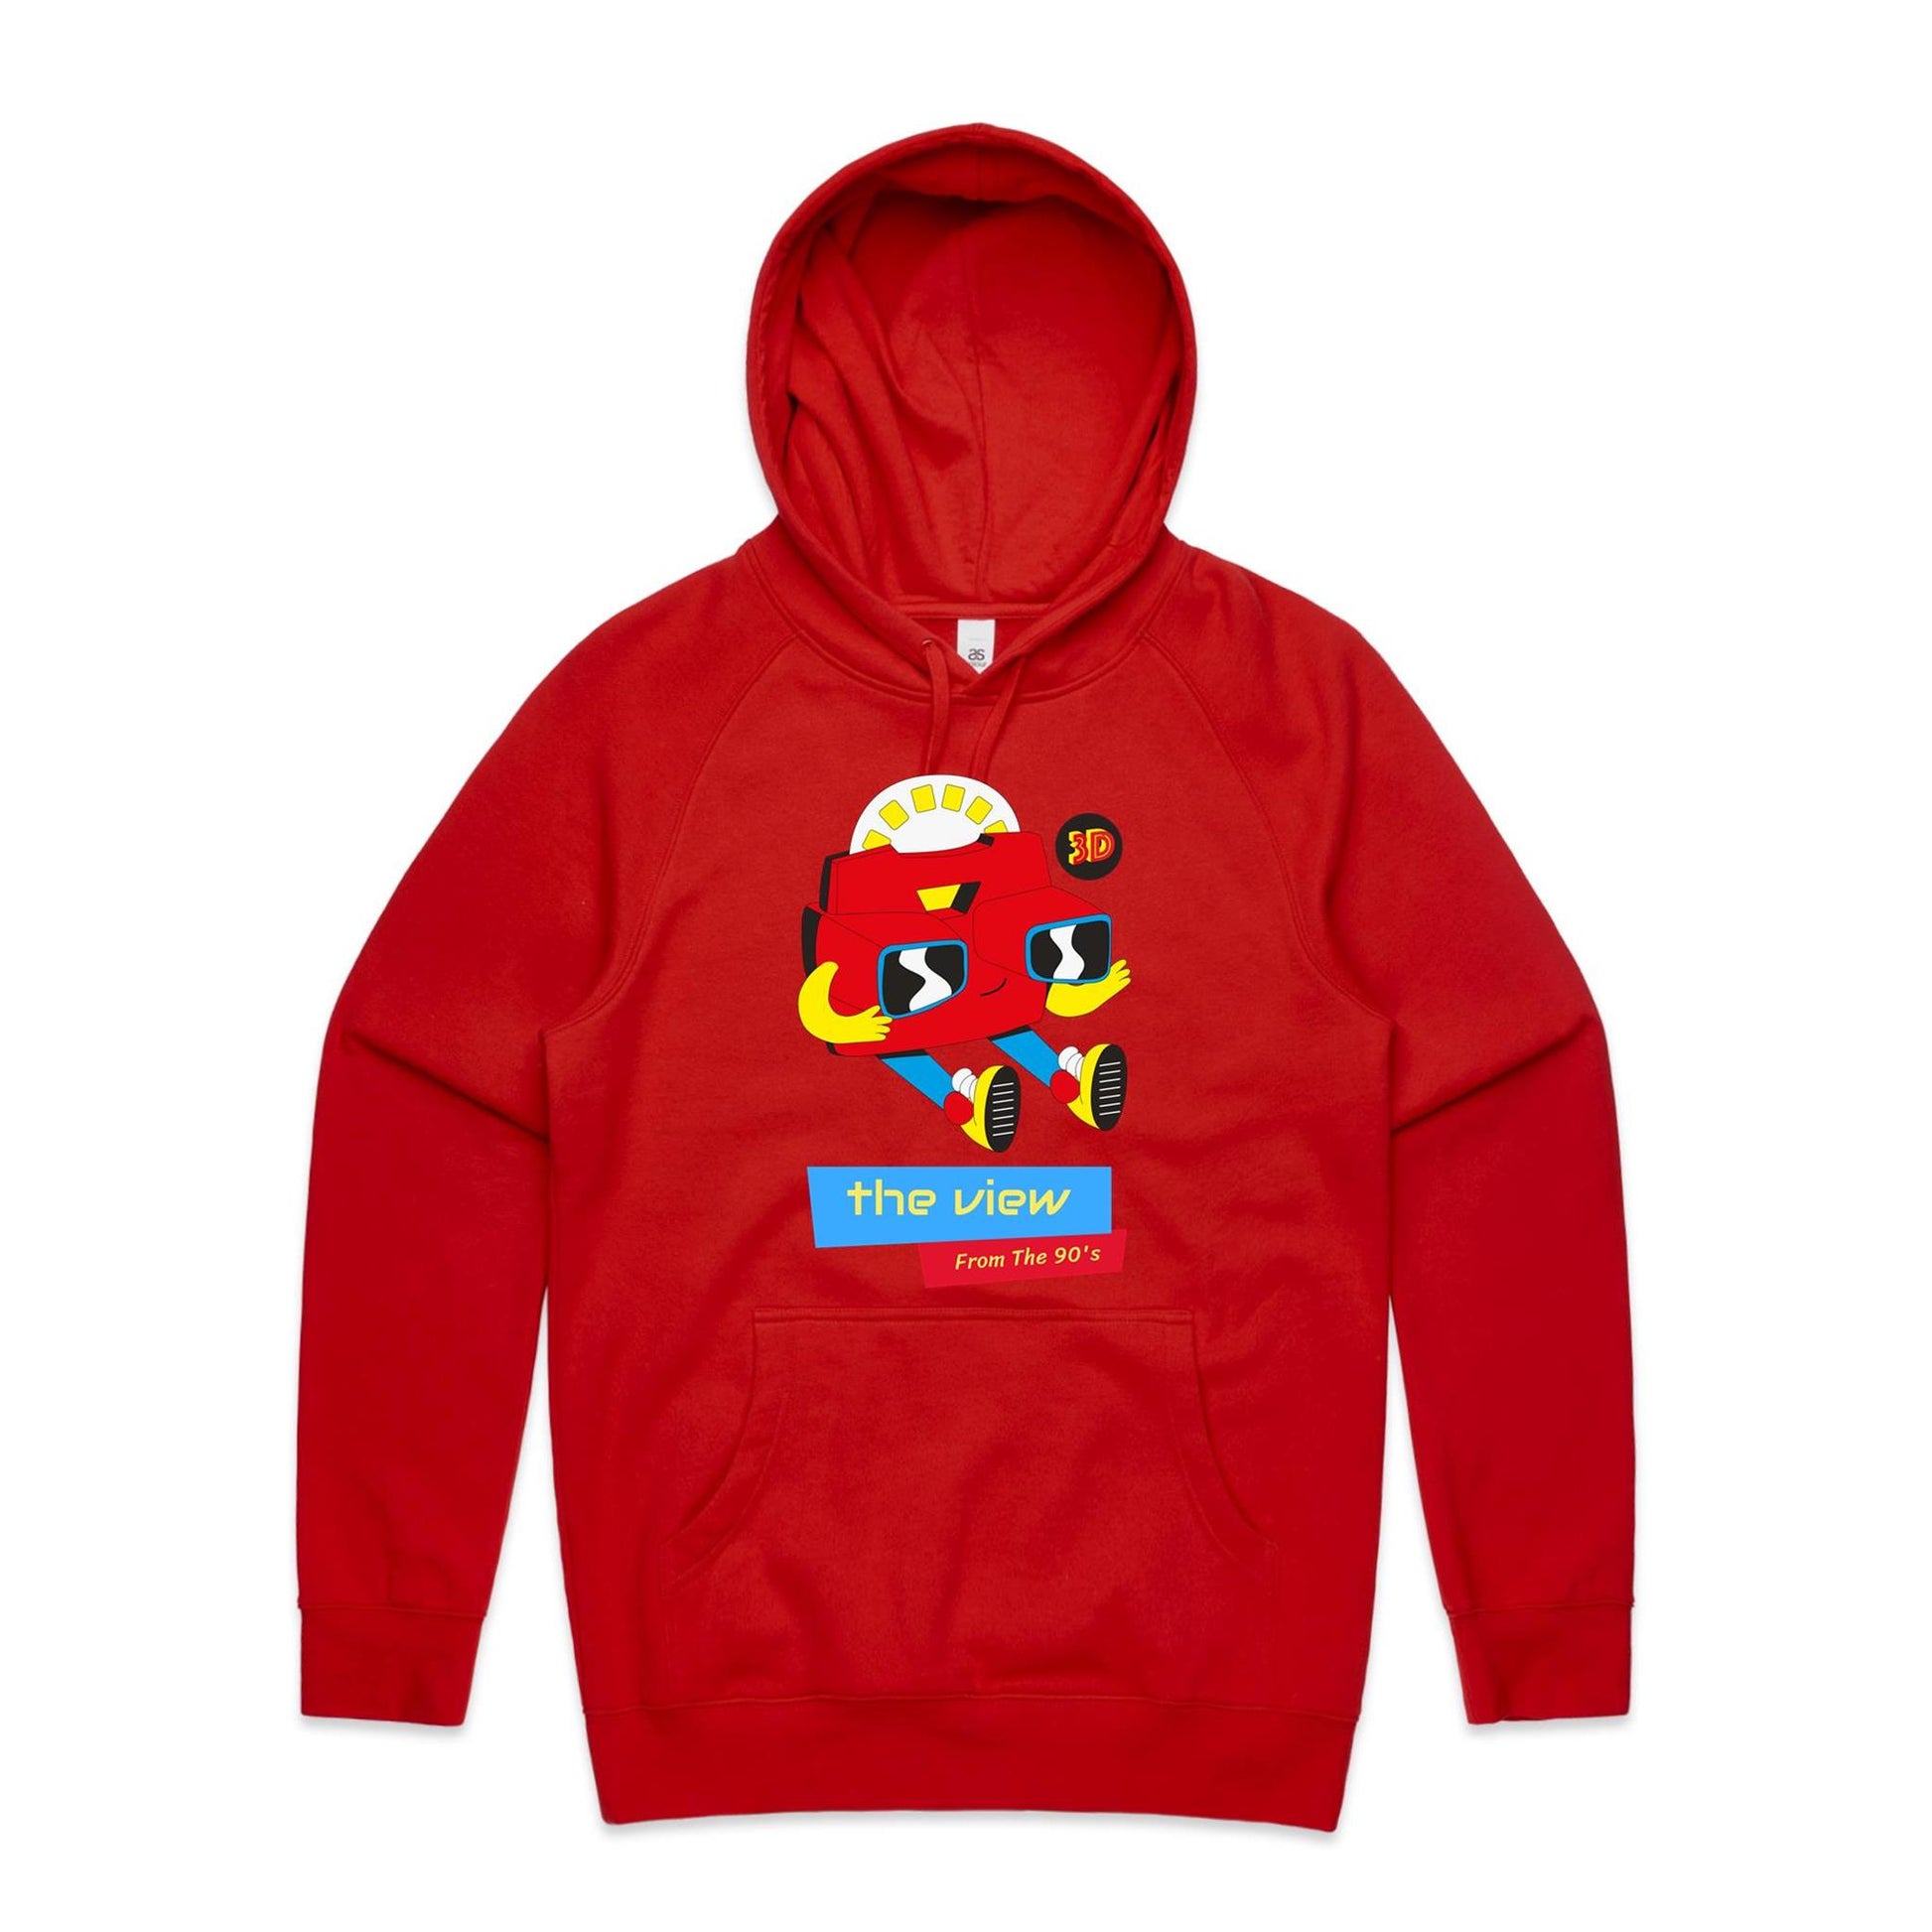 The View From The 90's - Supply Hood Red Mens Supply Hoodie Retro